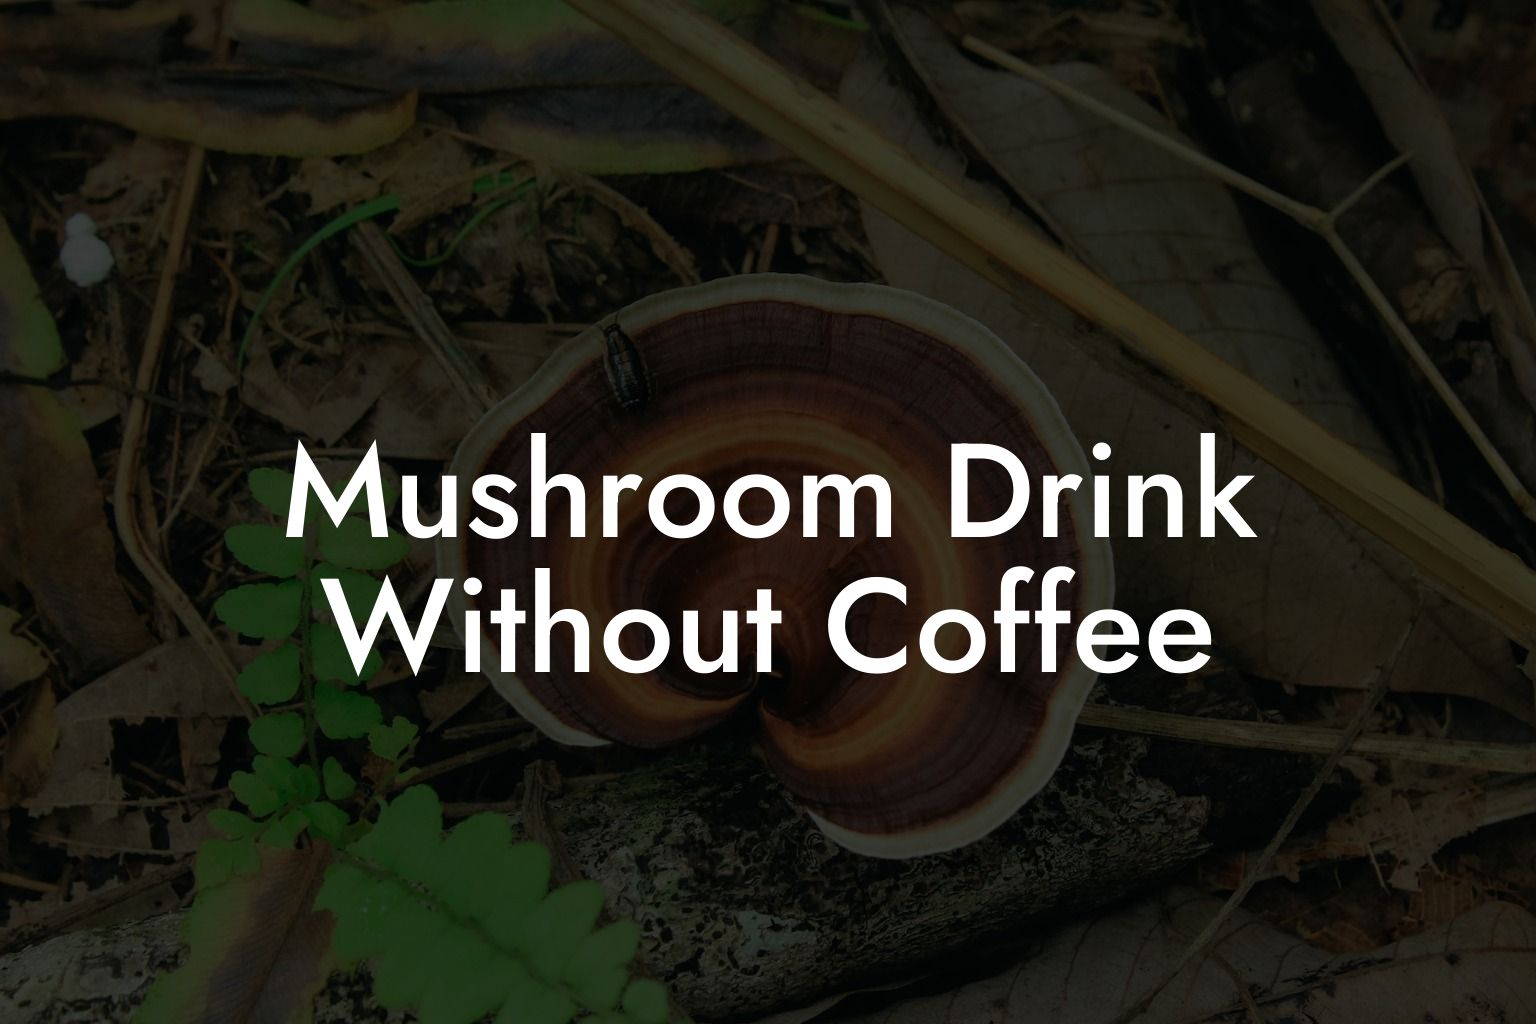 Mushroom Drink Without Coffee